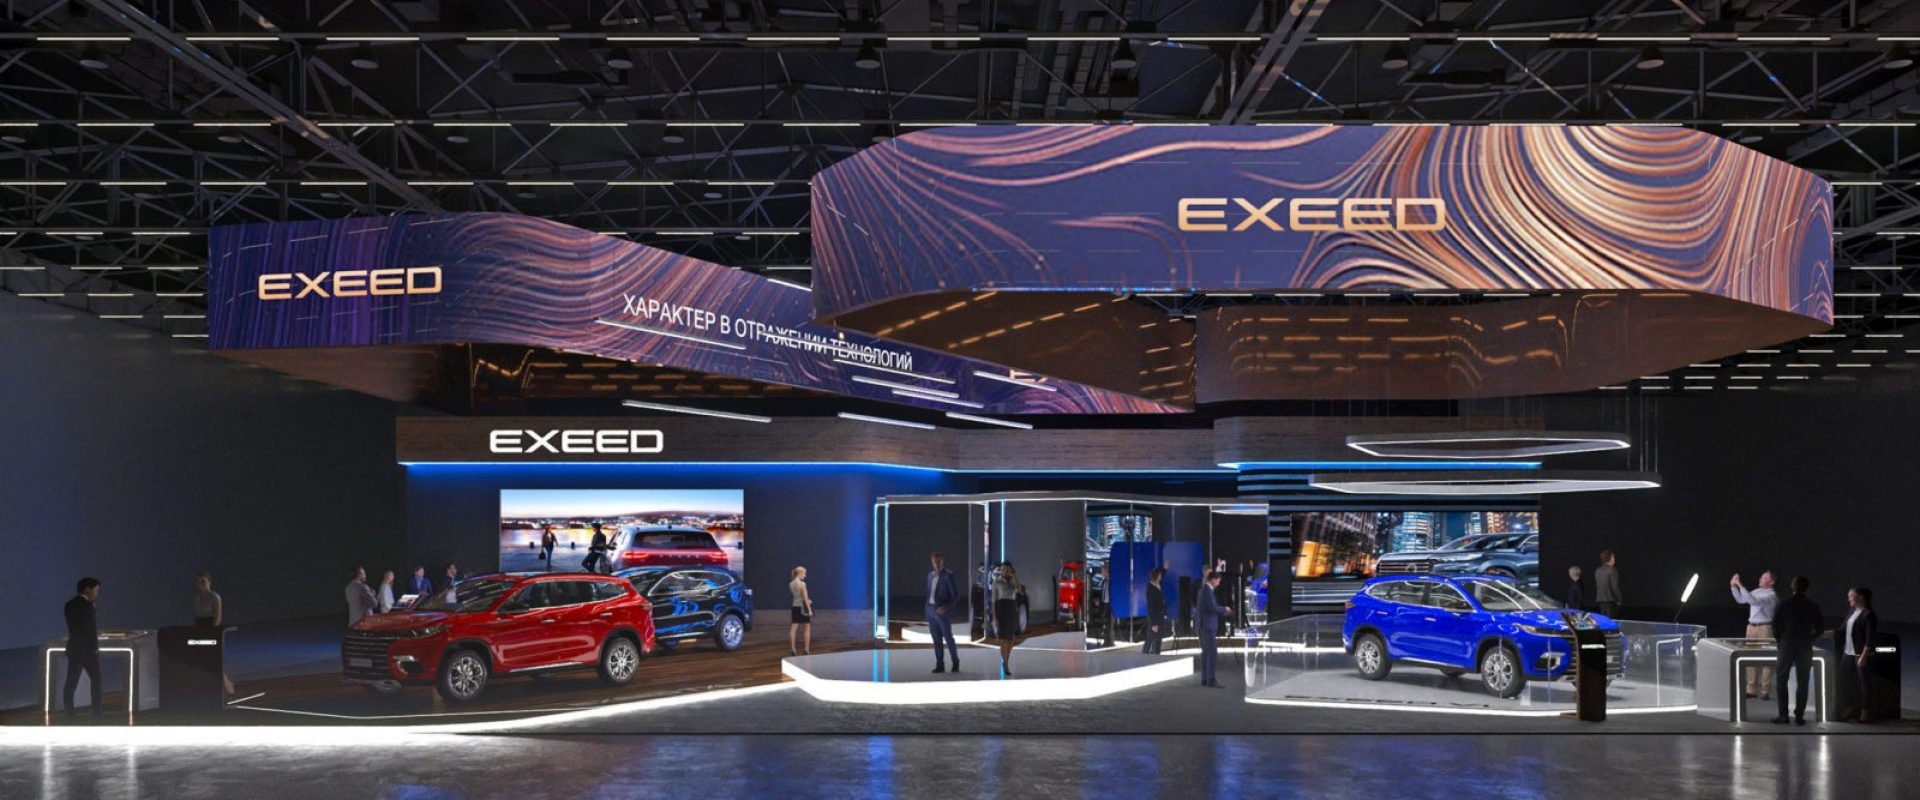 exeed_stand_design_02